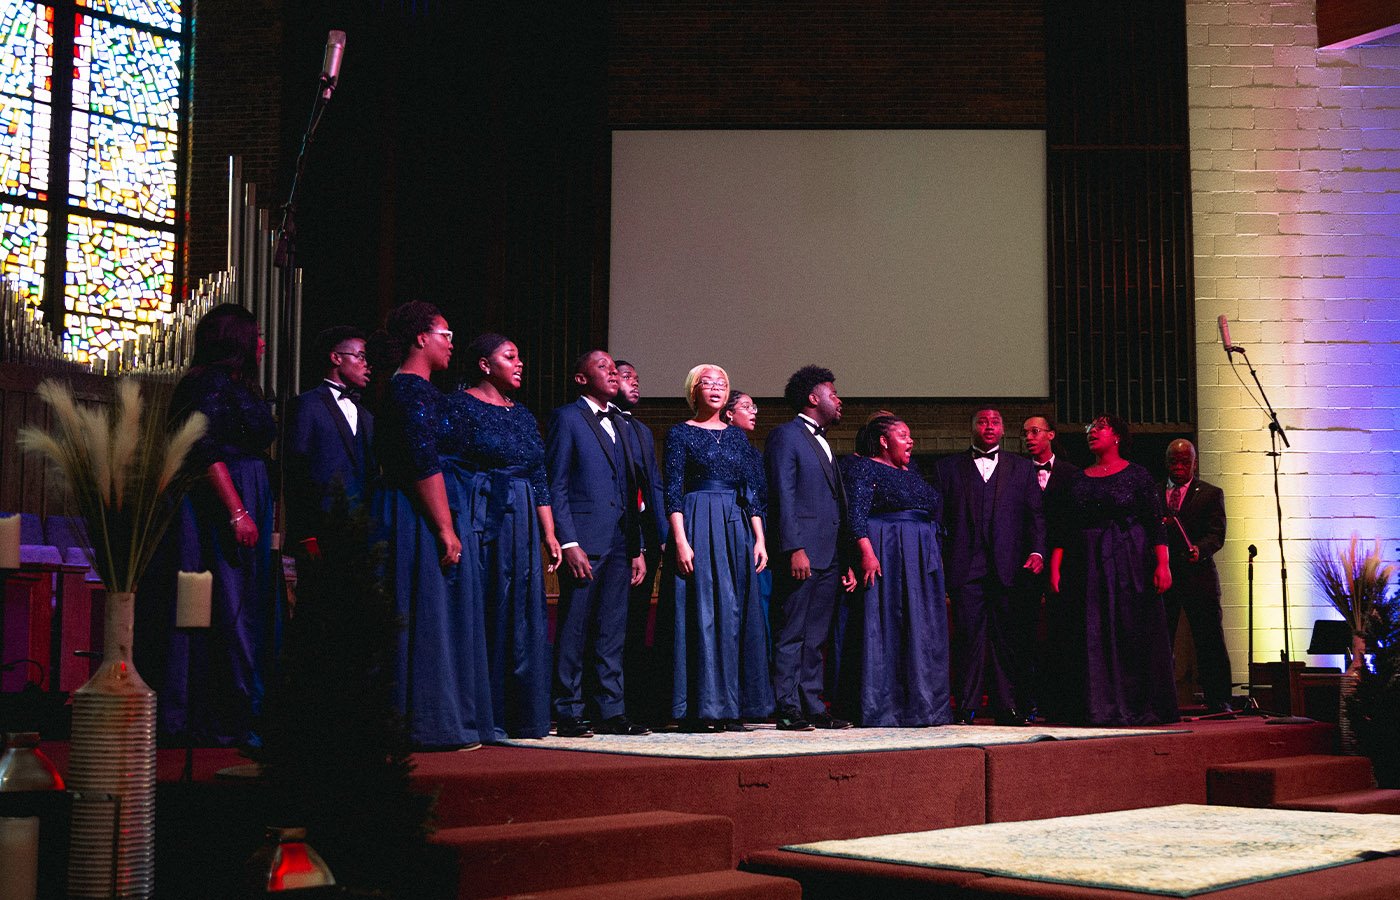 A worship choir sings on stage.